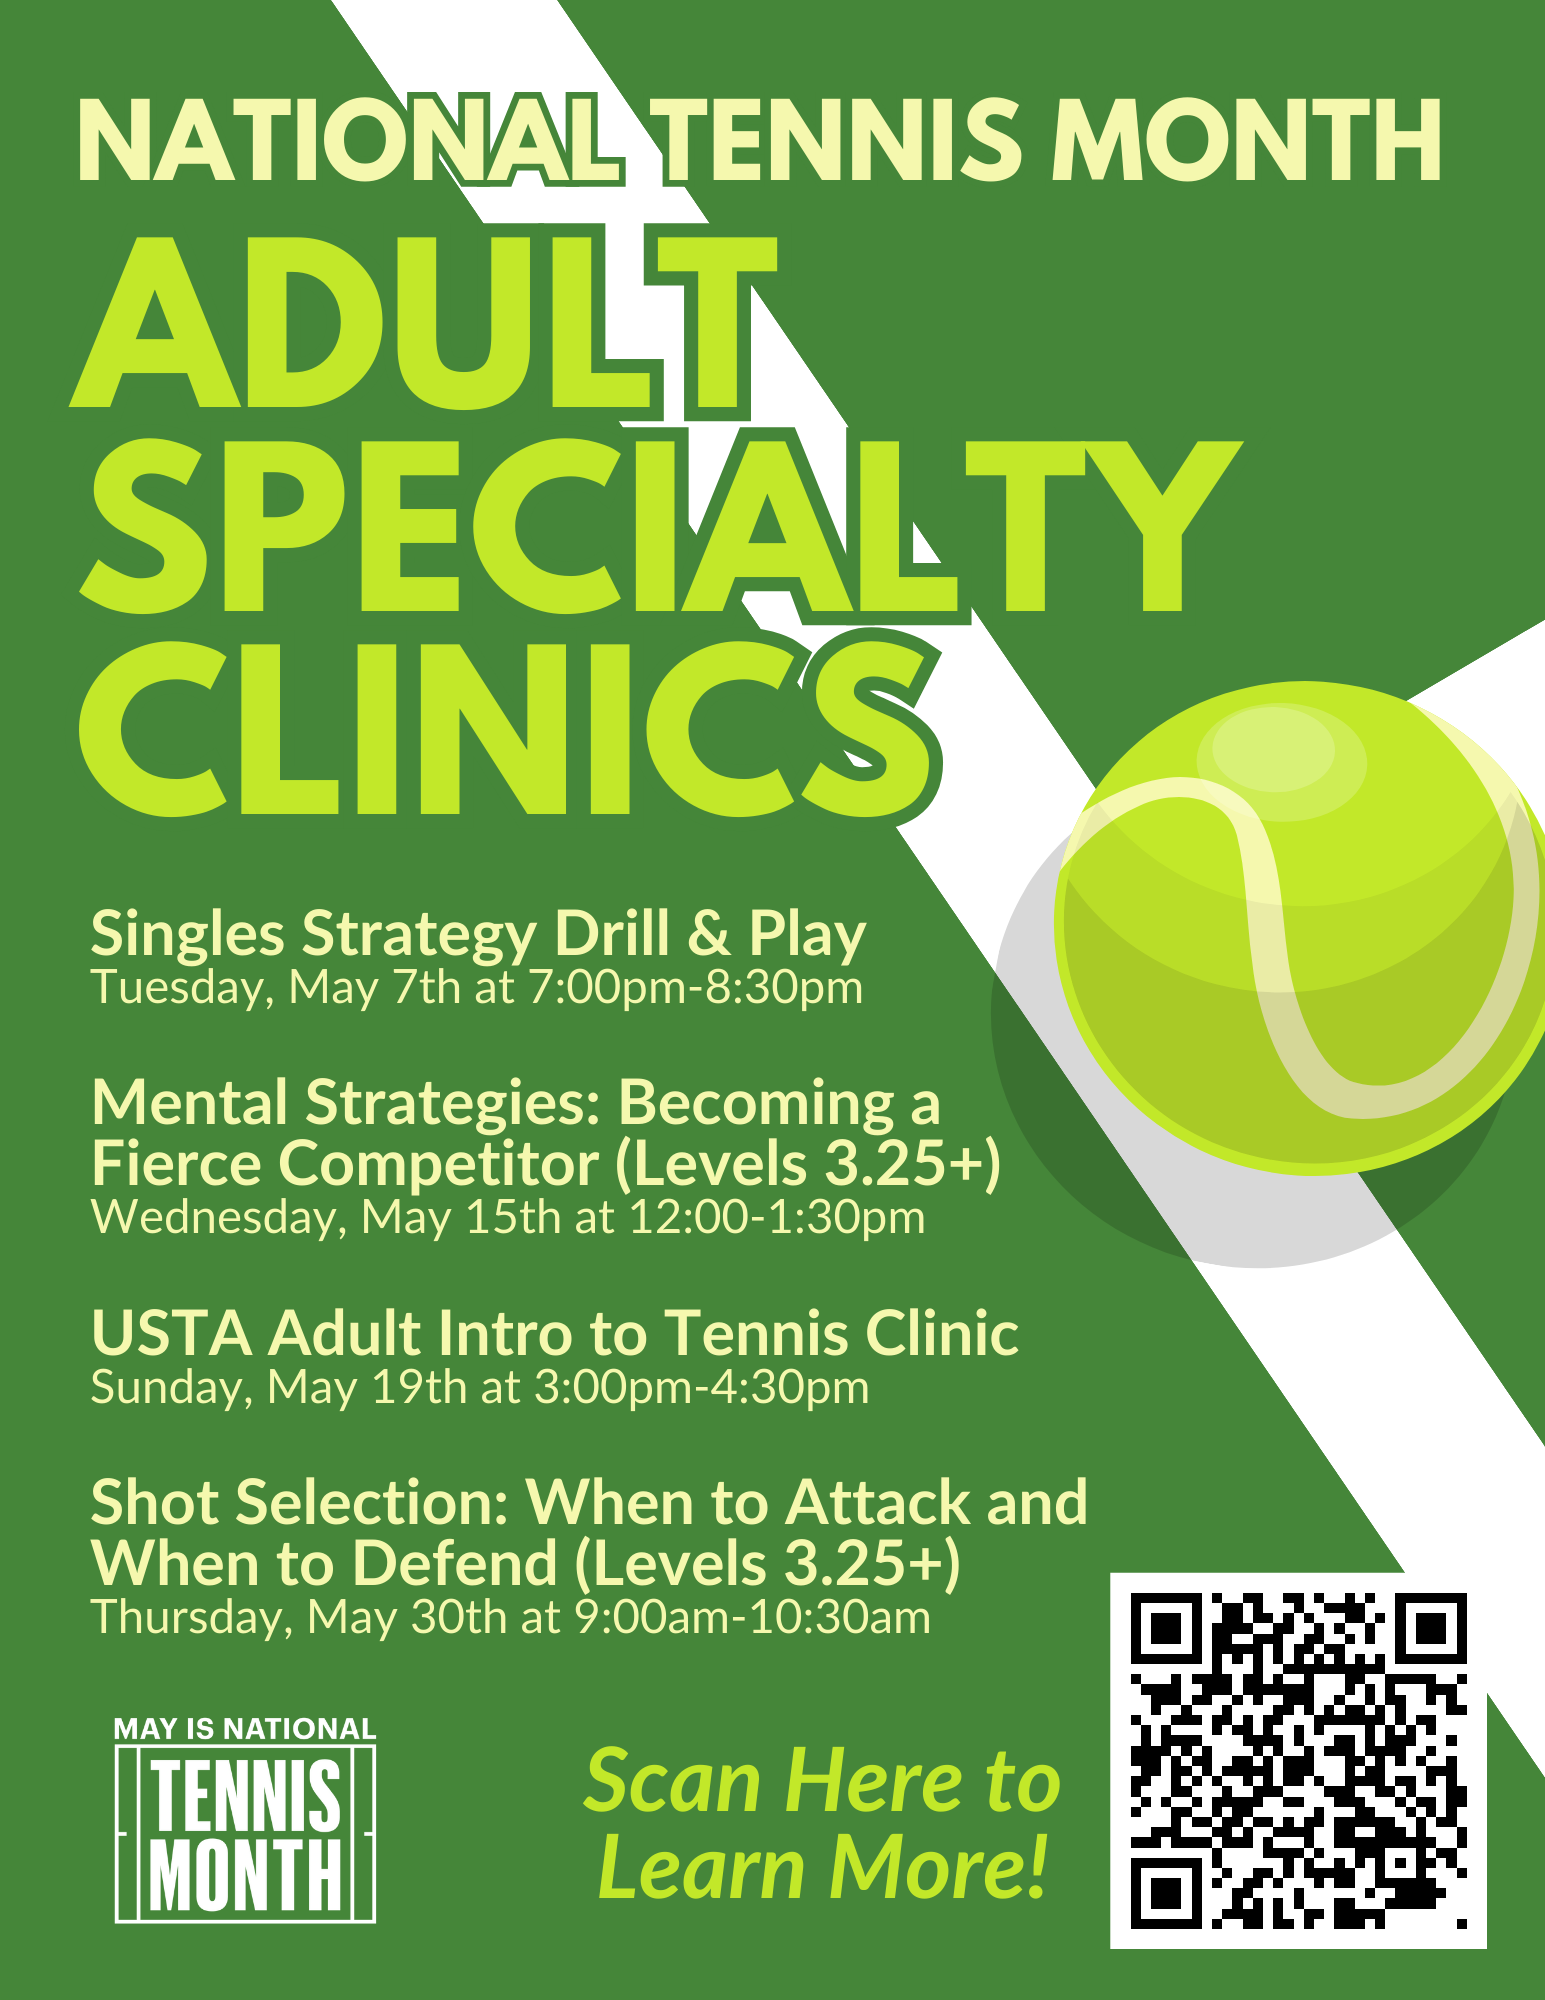 Wheaton Sport Center Adult Specialty Clinics, May is National Tennis Month